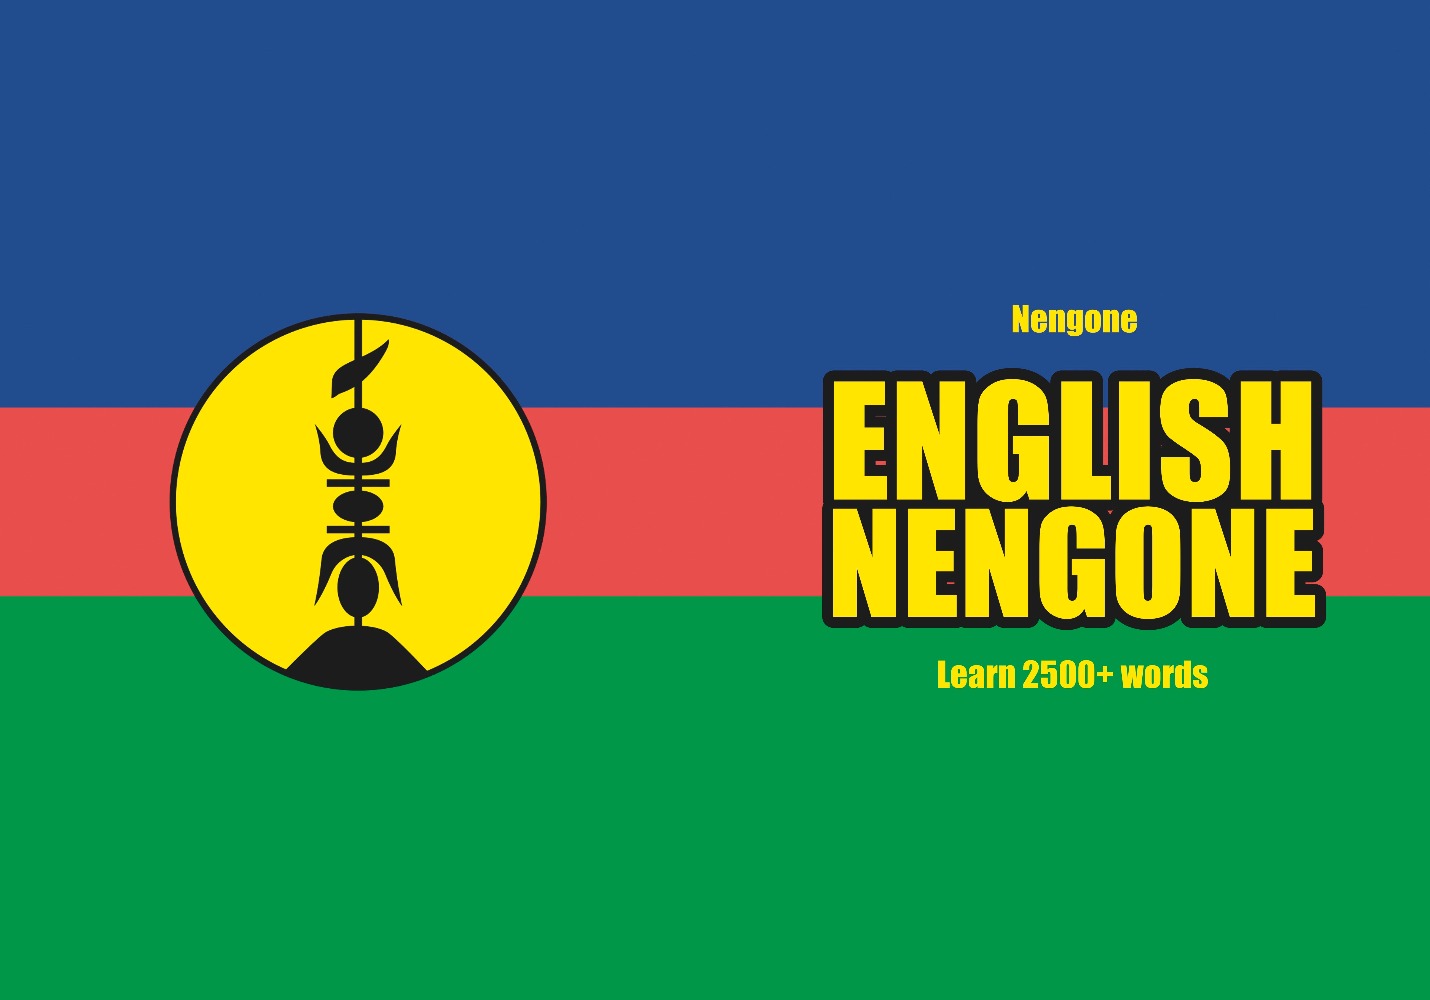 Nengone language learning notebook cover